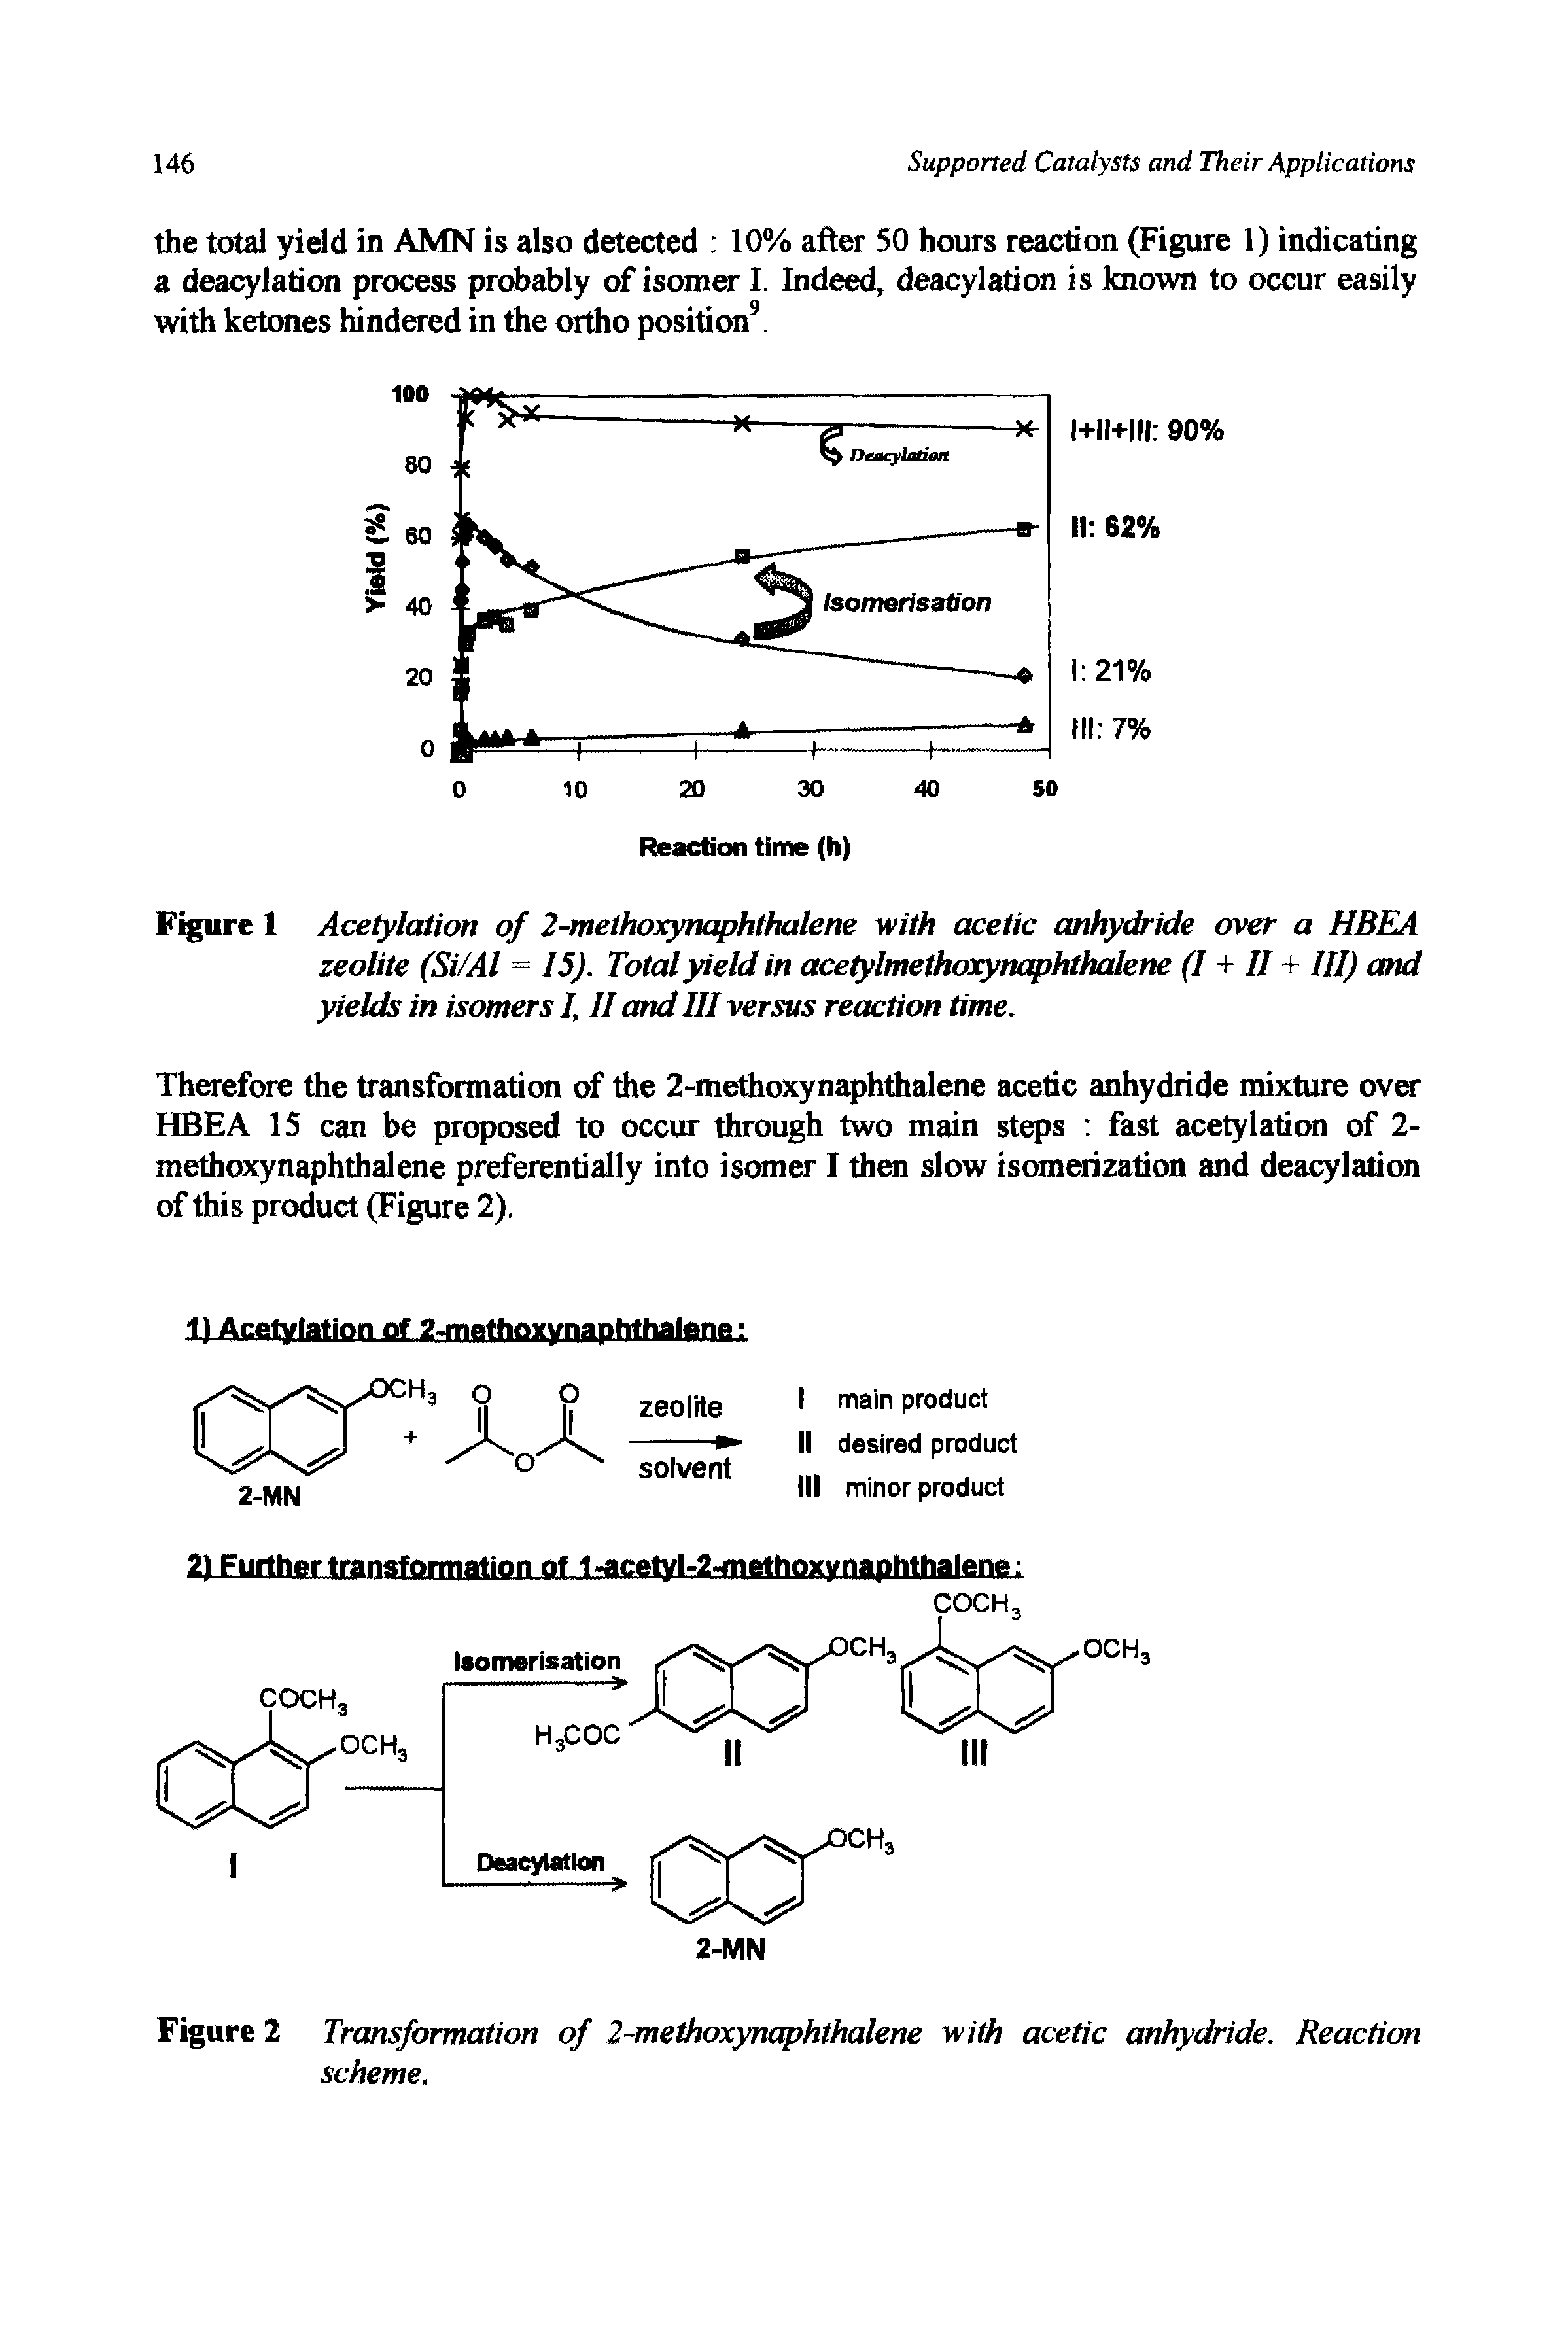 Figure 2 Transformation of 2-methoxynaphthalene with acetic anhydride. Reaction scheme.